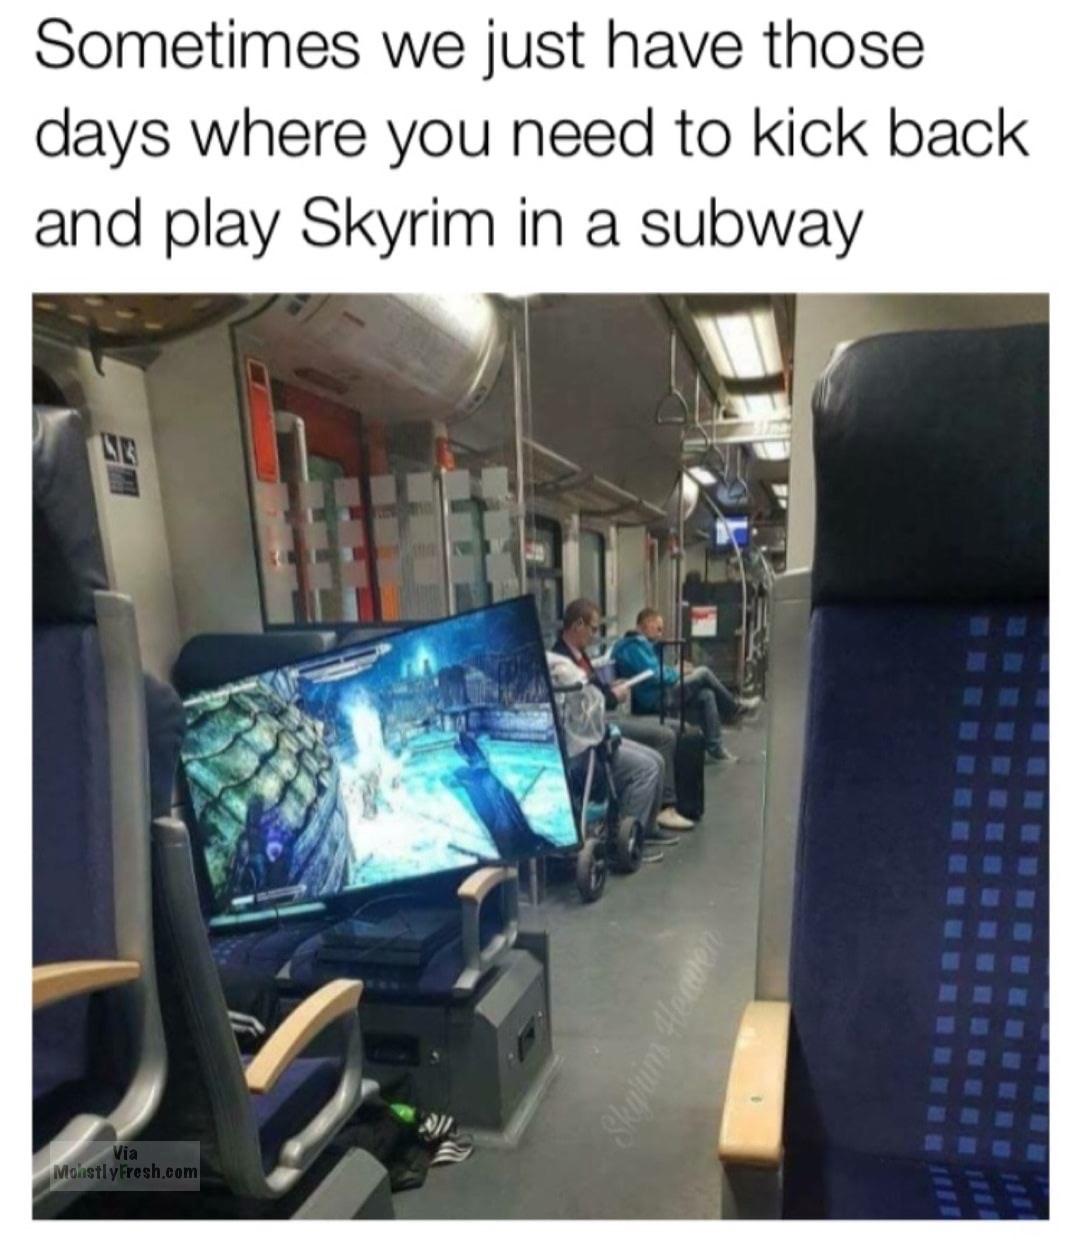 skyrim on the subway - Sometimes we just have those days where you need to kick back and play Skyrim in a subway Skuimte Via MonstlyFresh.com